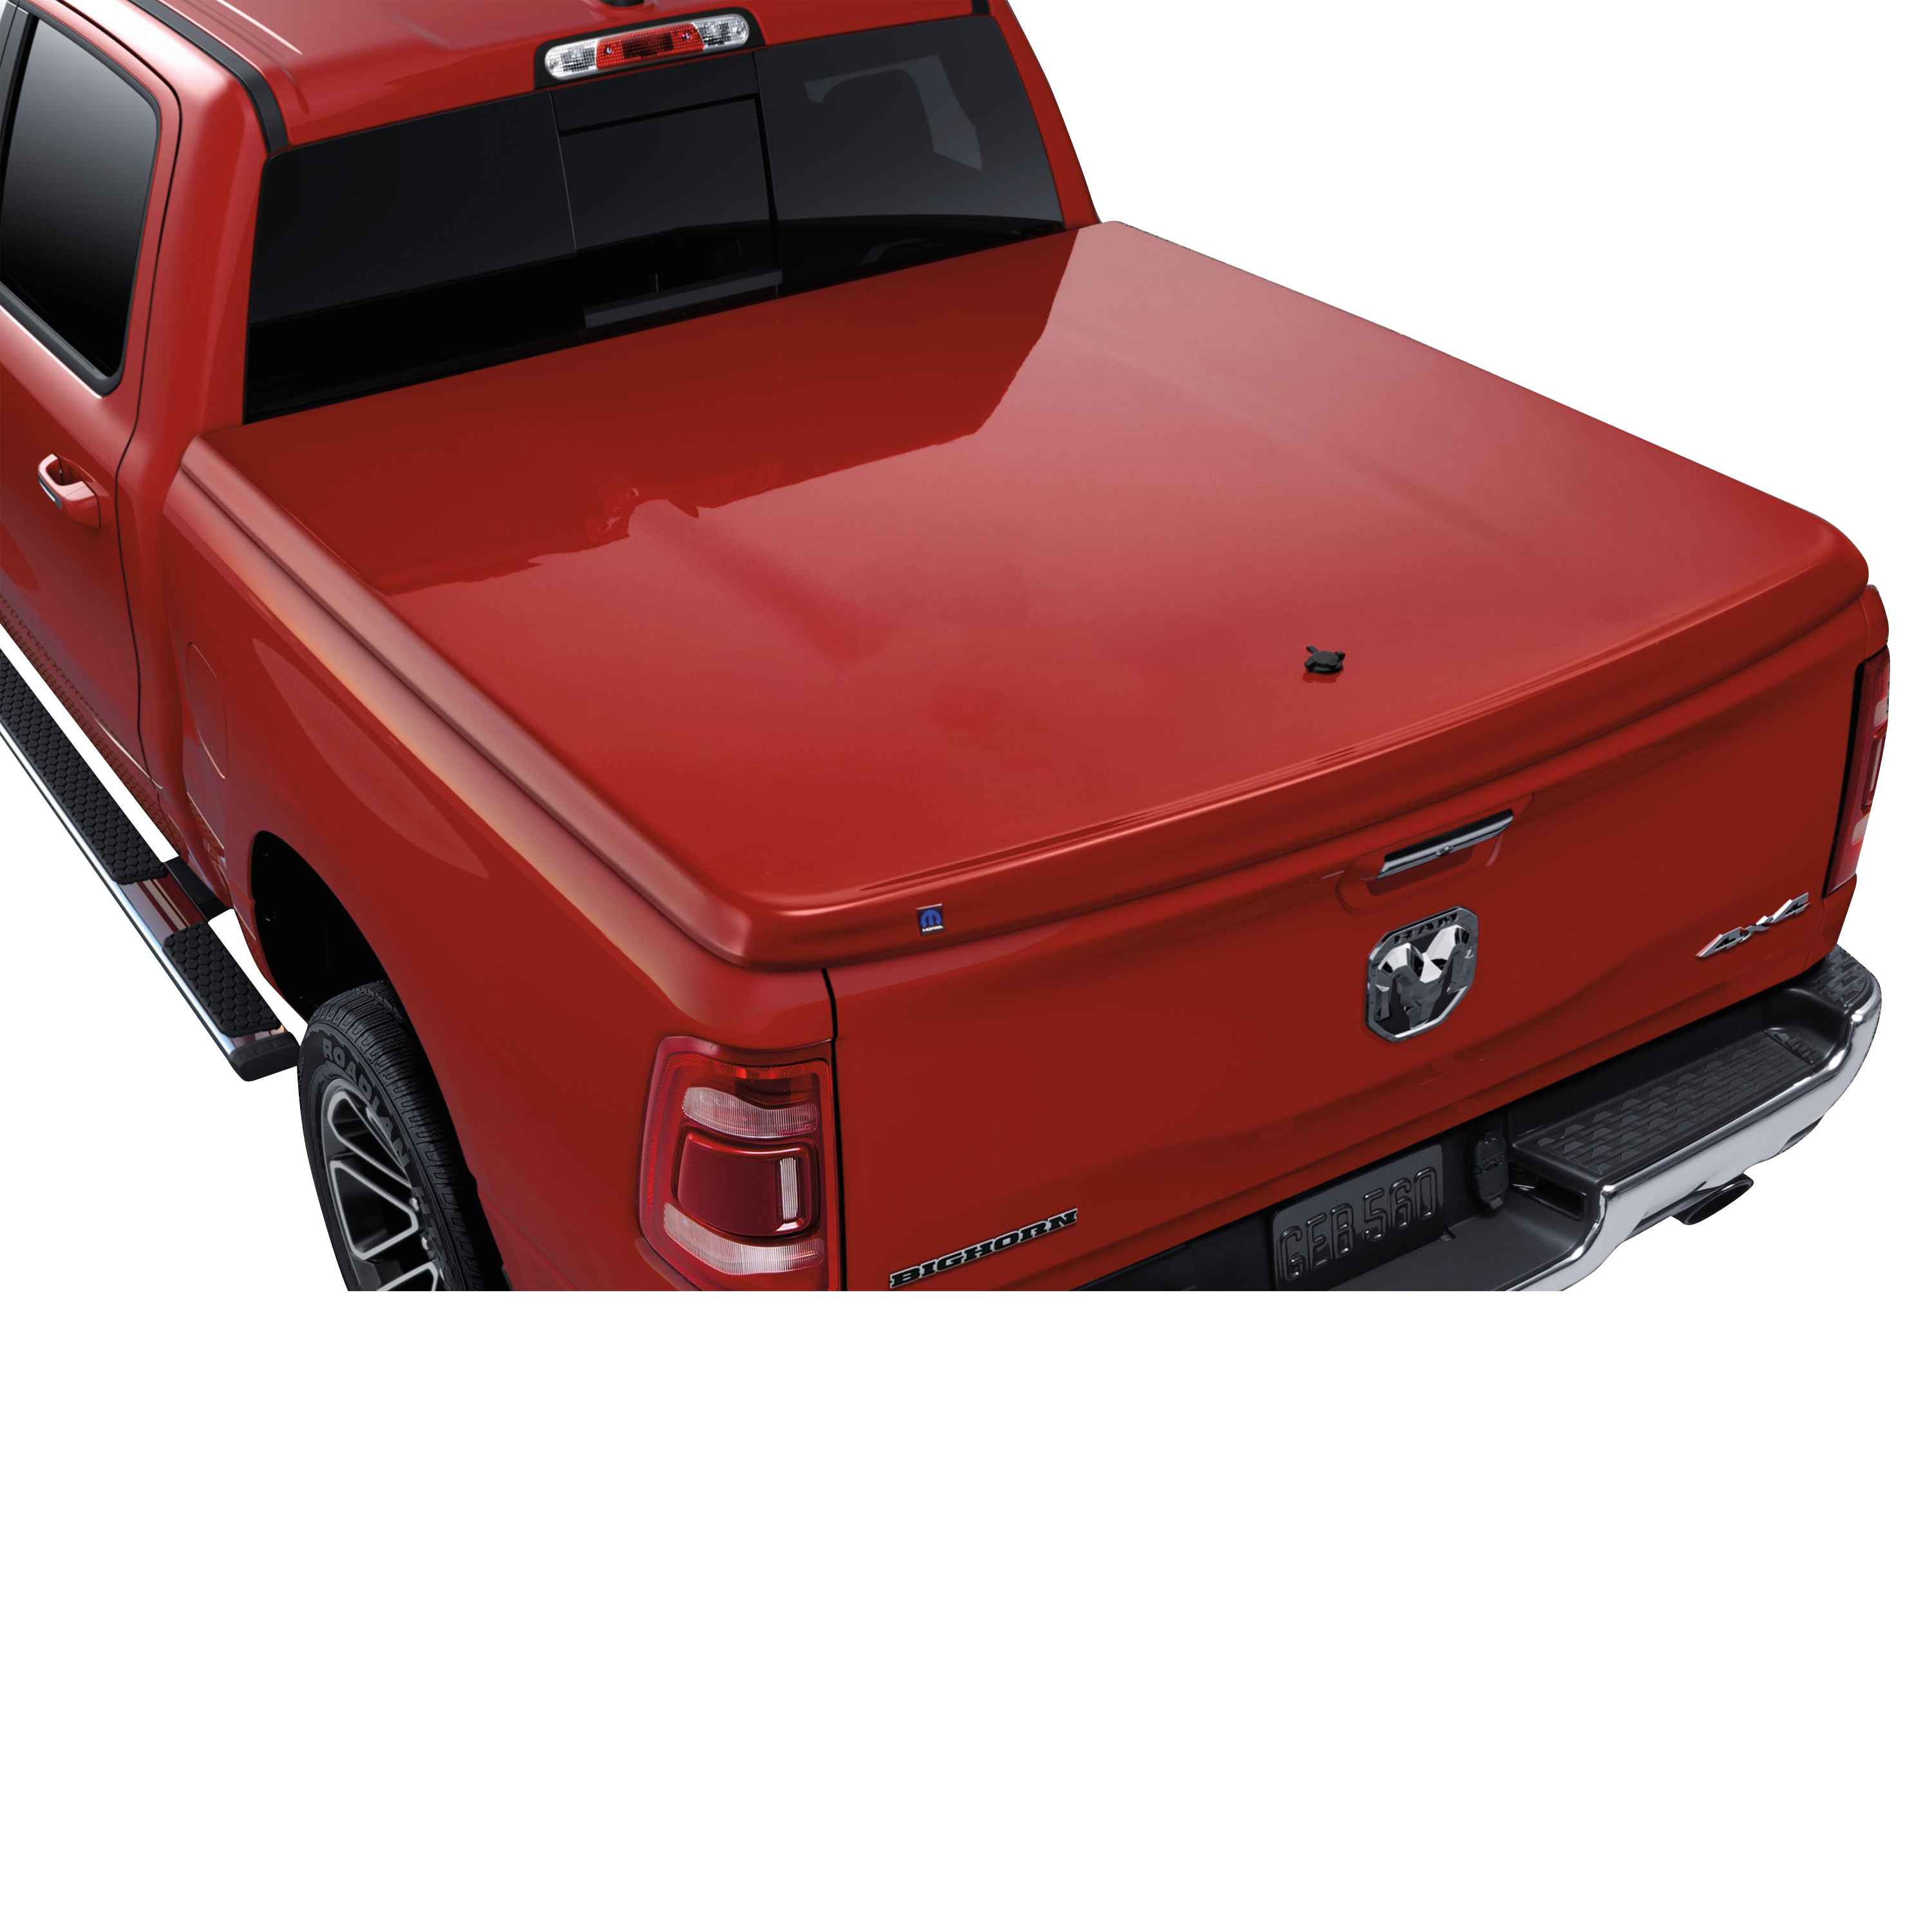 One-Piece Tonneau Cover in Body Color for 6 4 Conventional Bed - Delmonico Red